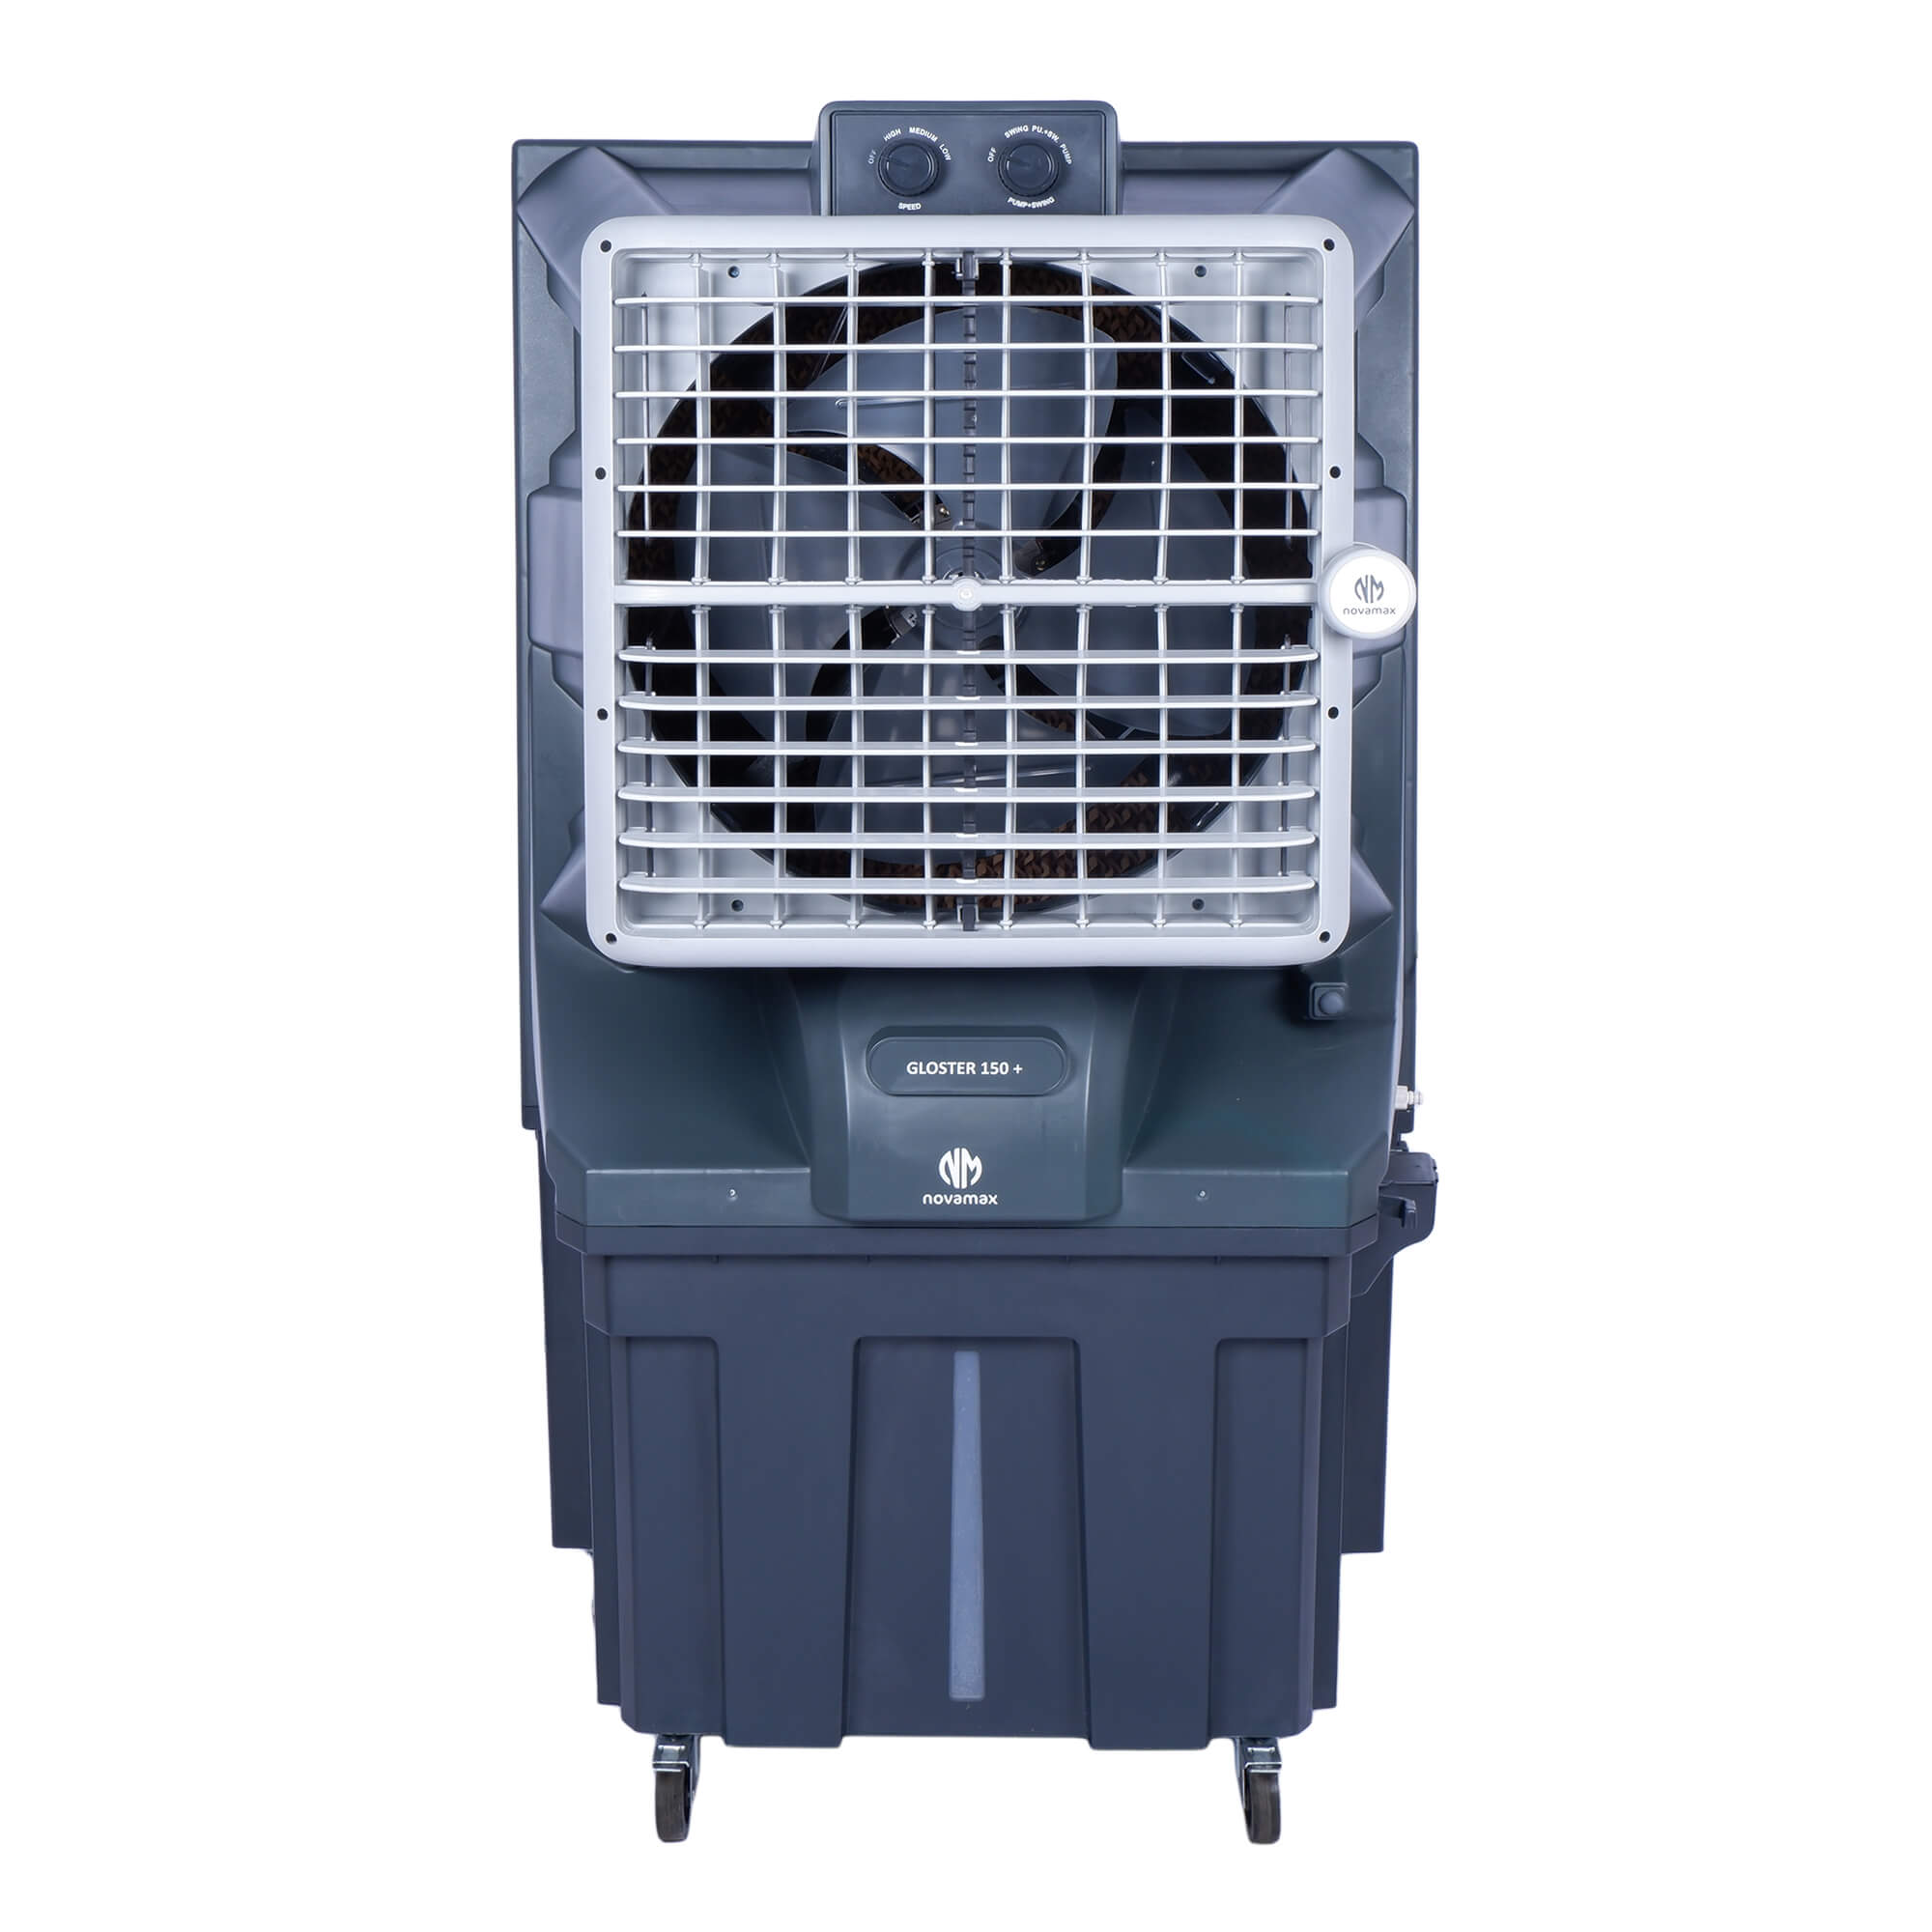 GLOSTER 150+ (Grey, Gloster 150 L Desert Air Cooler With Powerful Air Throw, Honeycomb Cooling & Auto Swing Technology)